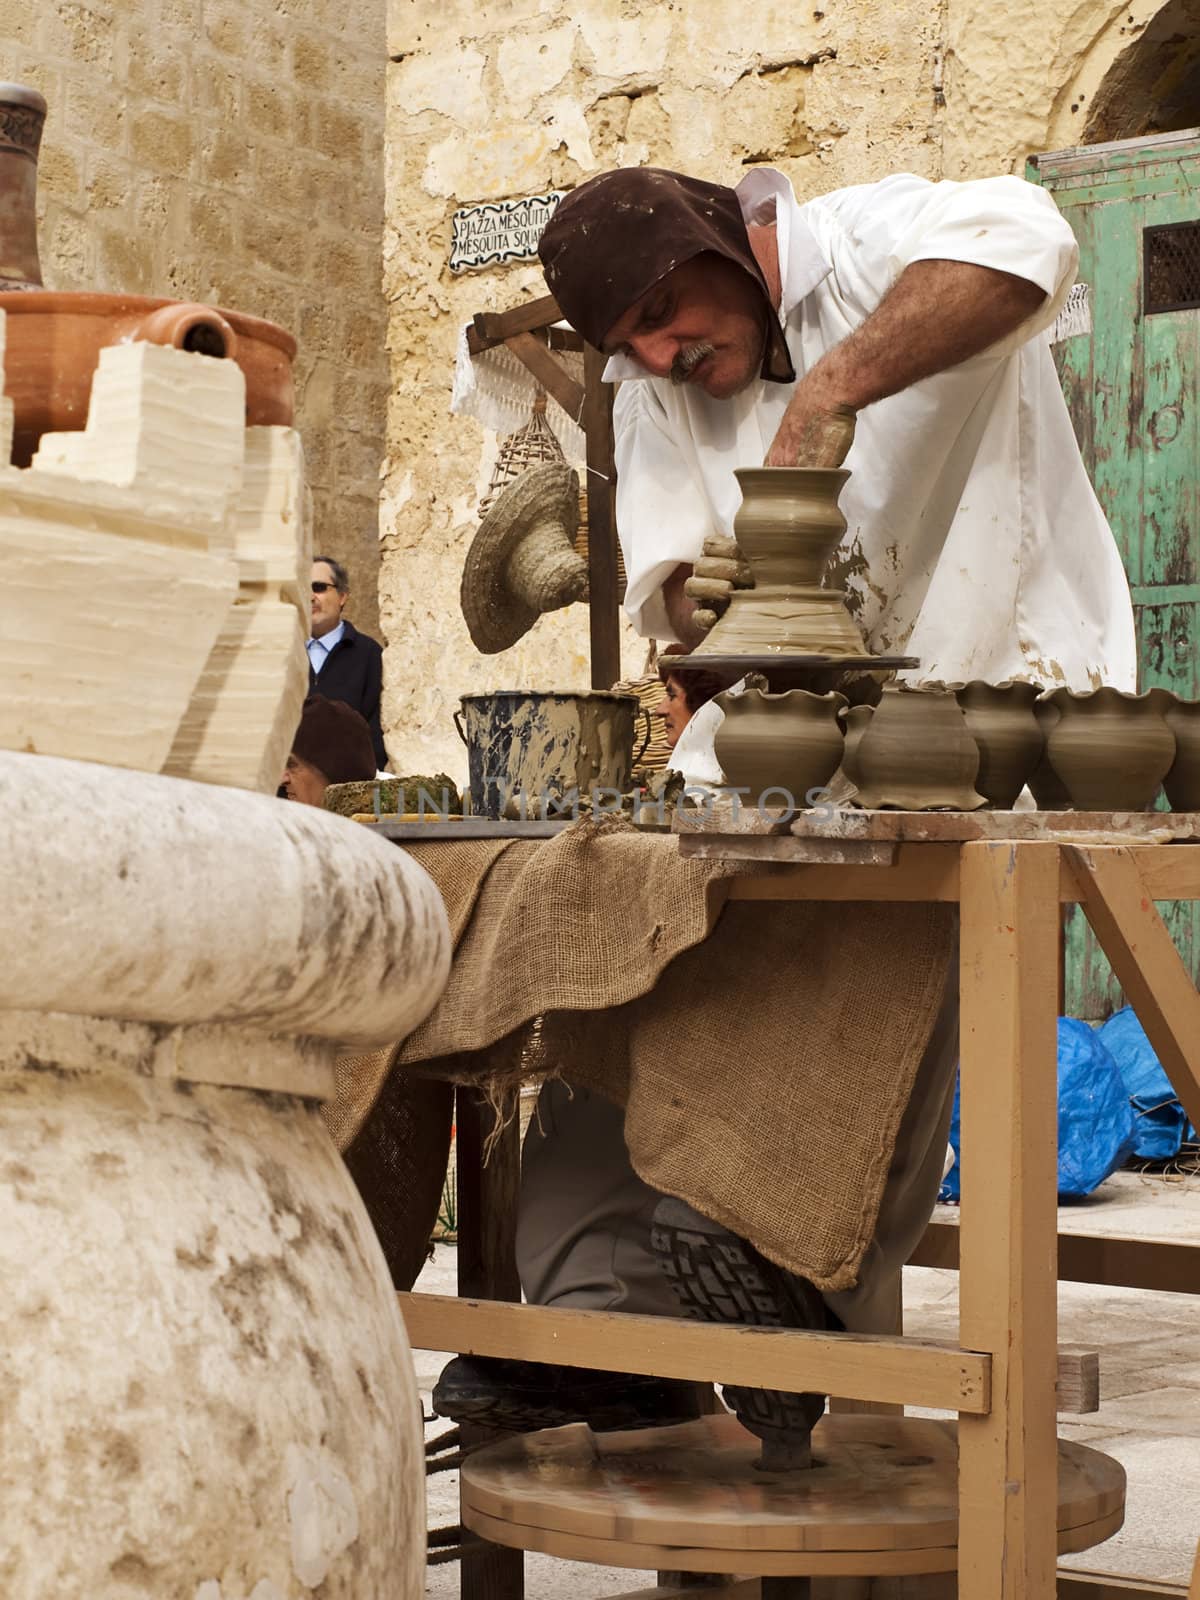 Medieval Pottery Maker by PhotoWorks